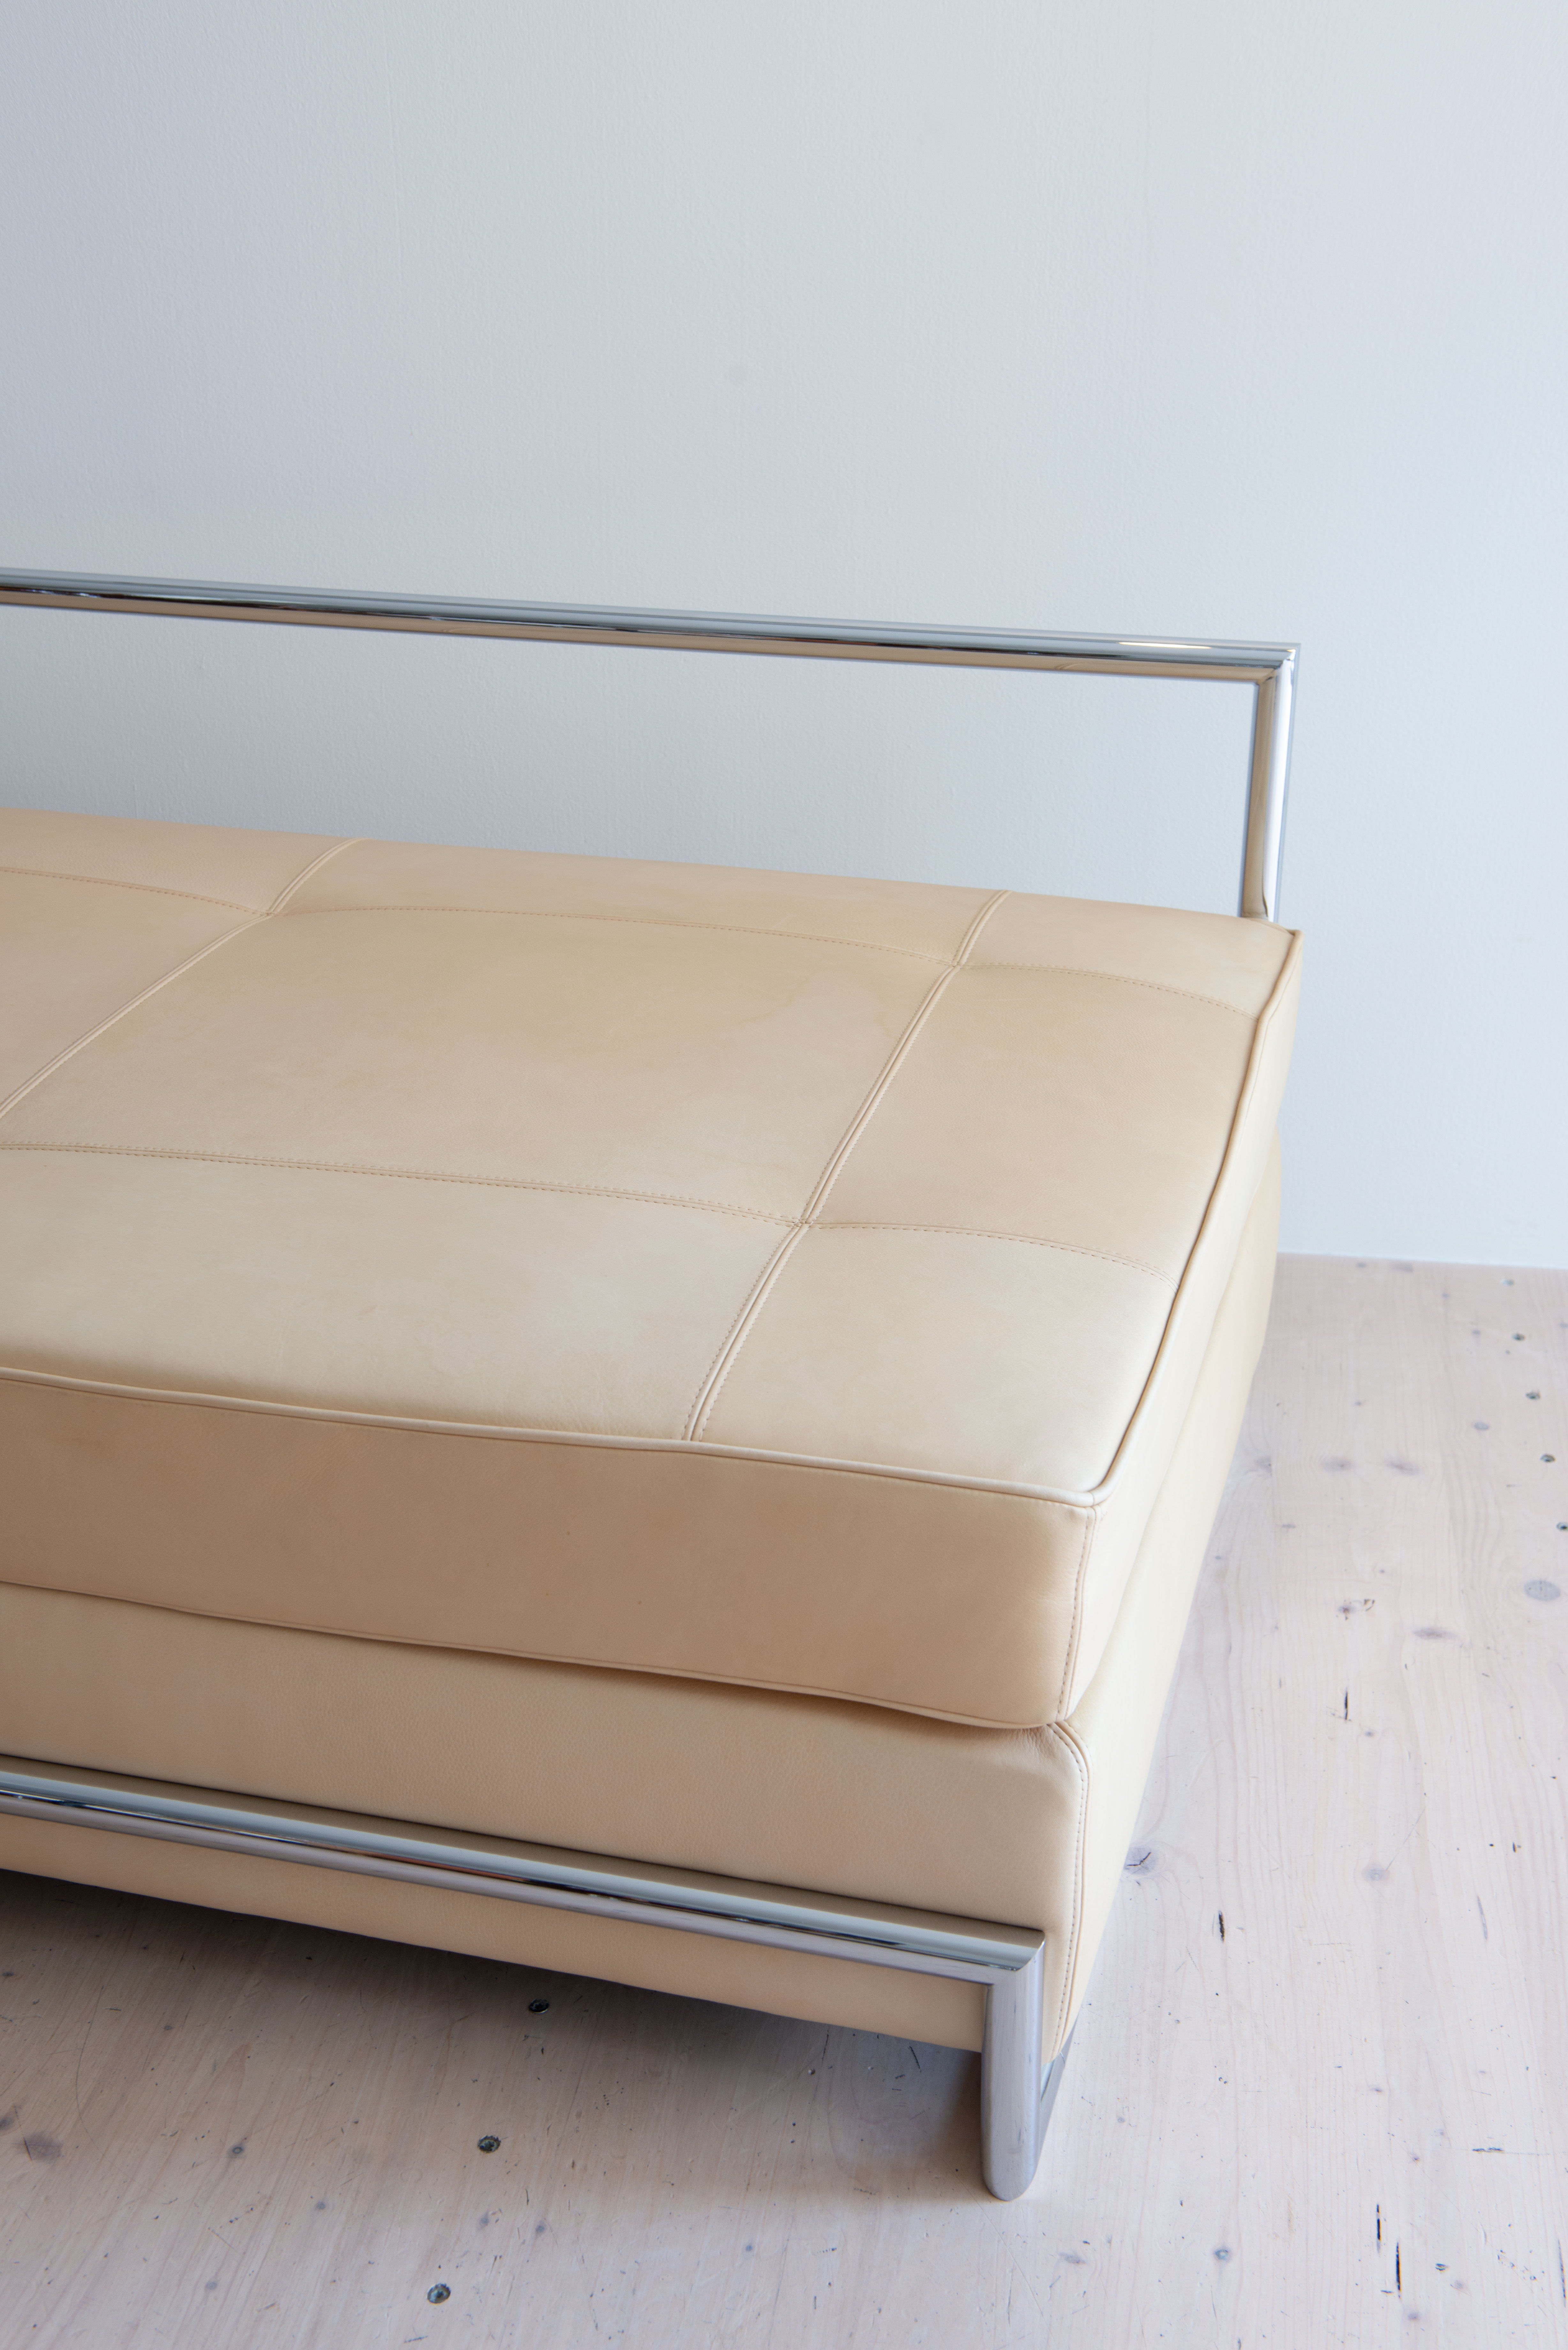 Eileen Gray E-1027 Day Bed. Designed by Eileen Gray. Produced by ClassiCon. Available at heyday möbel, Grubenstrasse 19, 8045 Zürich, Switzerland.